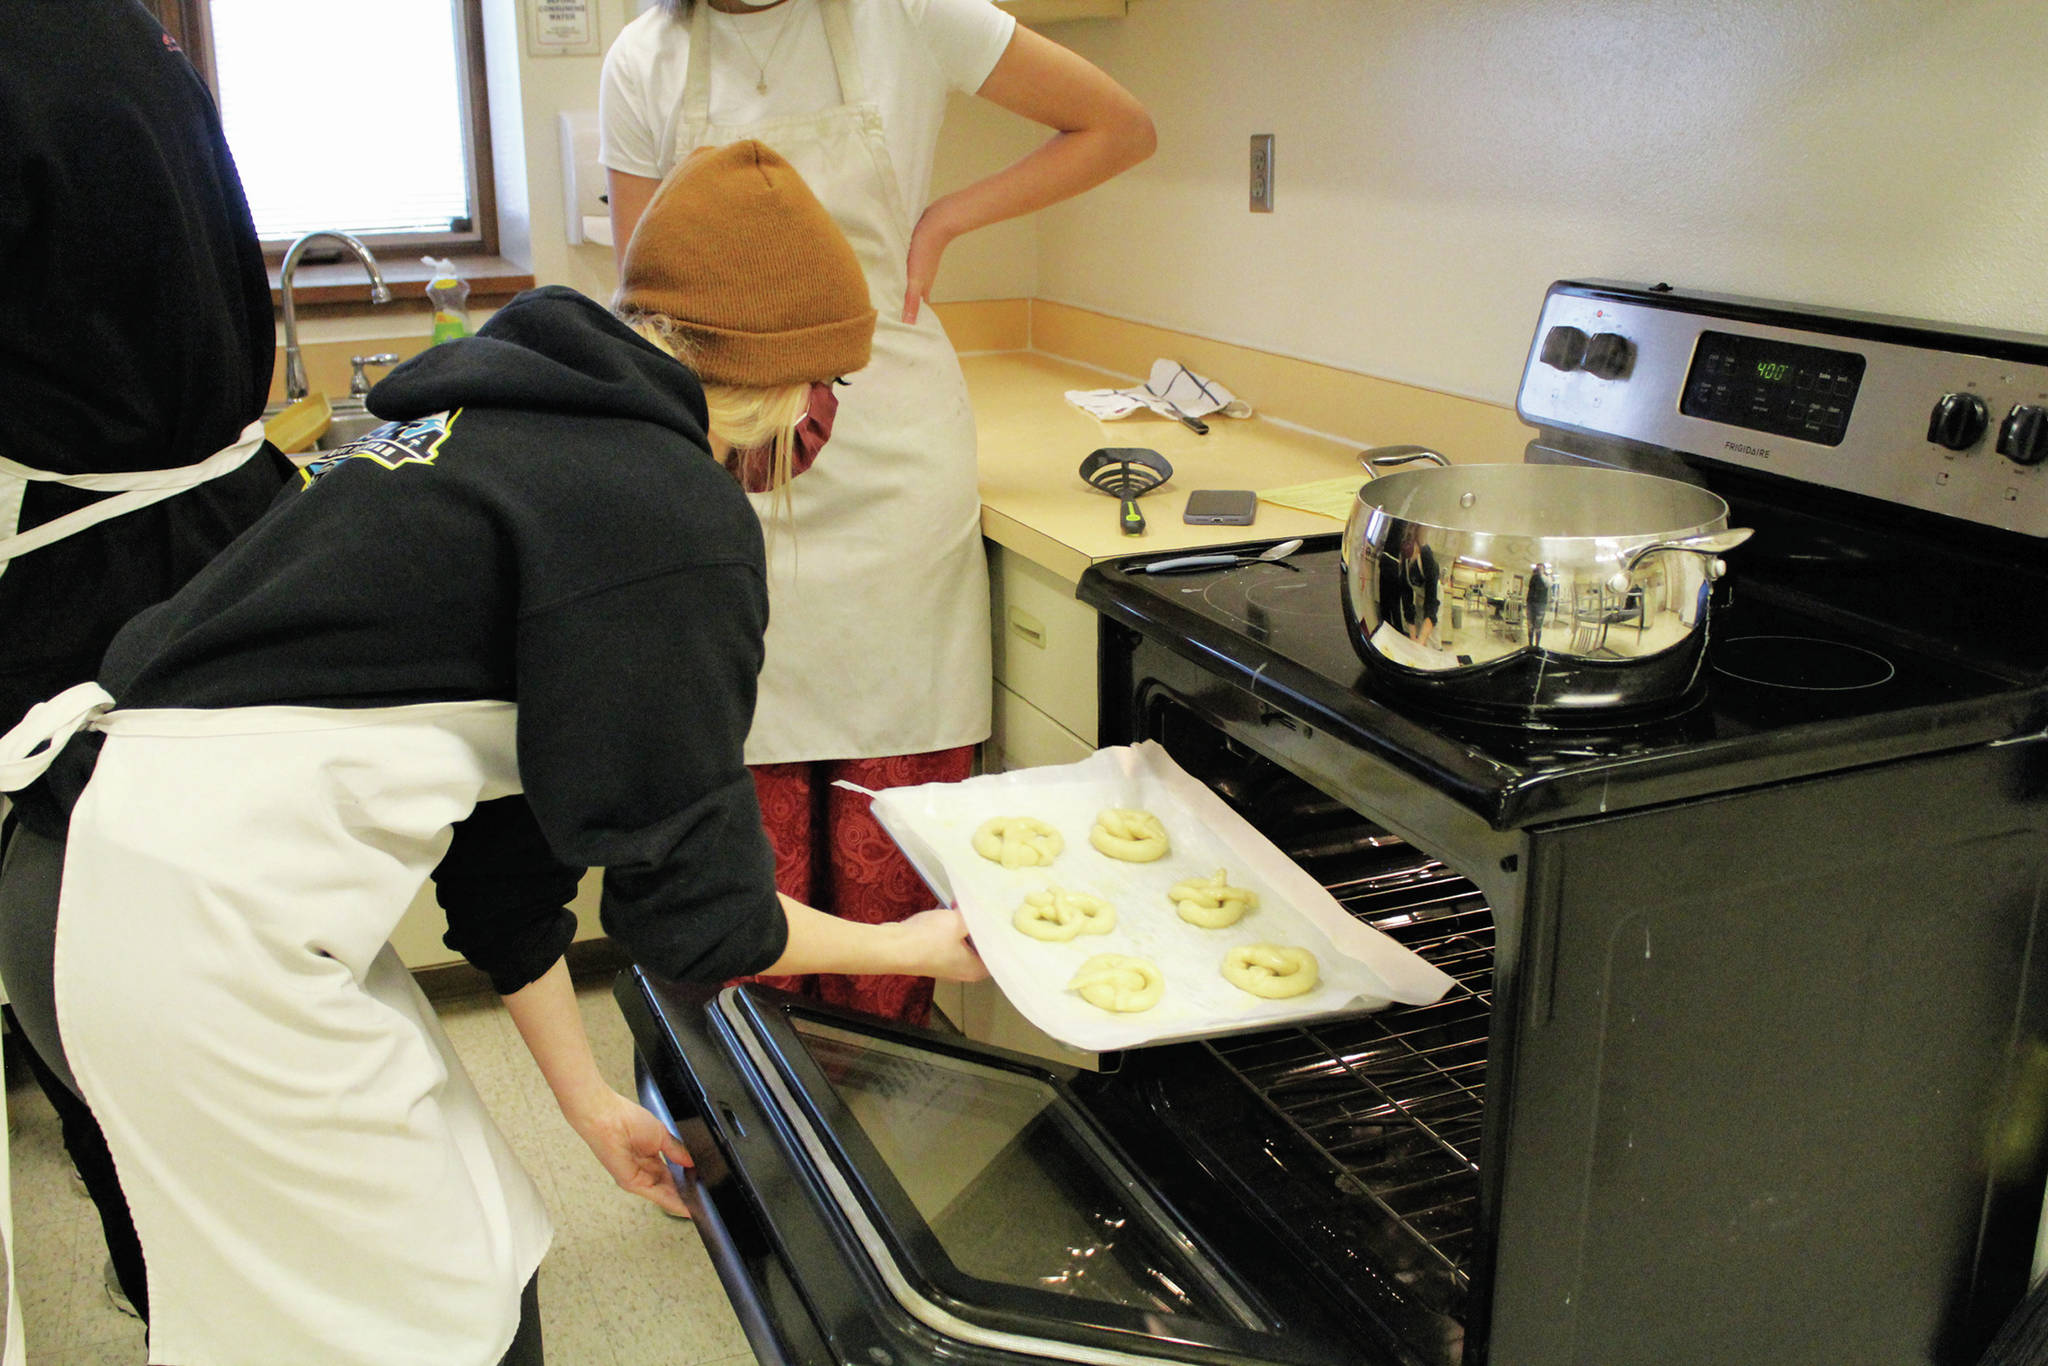 Izzy Dye pops a batch of pretzels into the oven during a high school food and nutrition class at Homer High School in Homer, Alaska. (Photo by Katelyn Engebretsen/Homer High Yearbook)